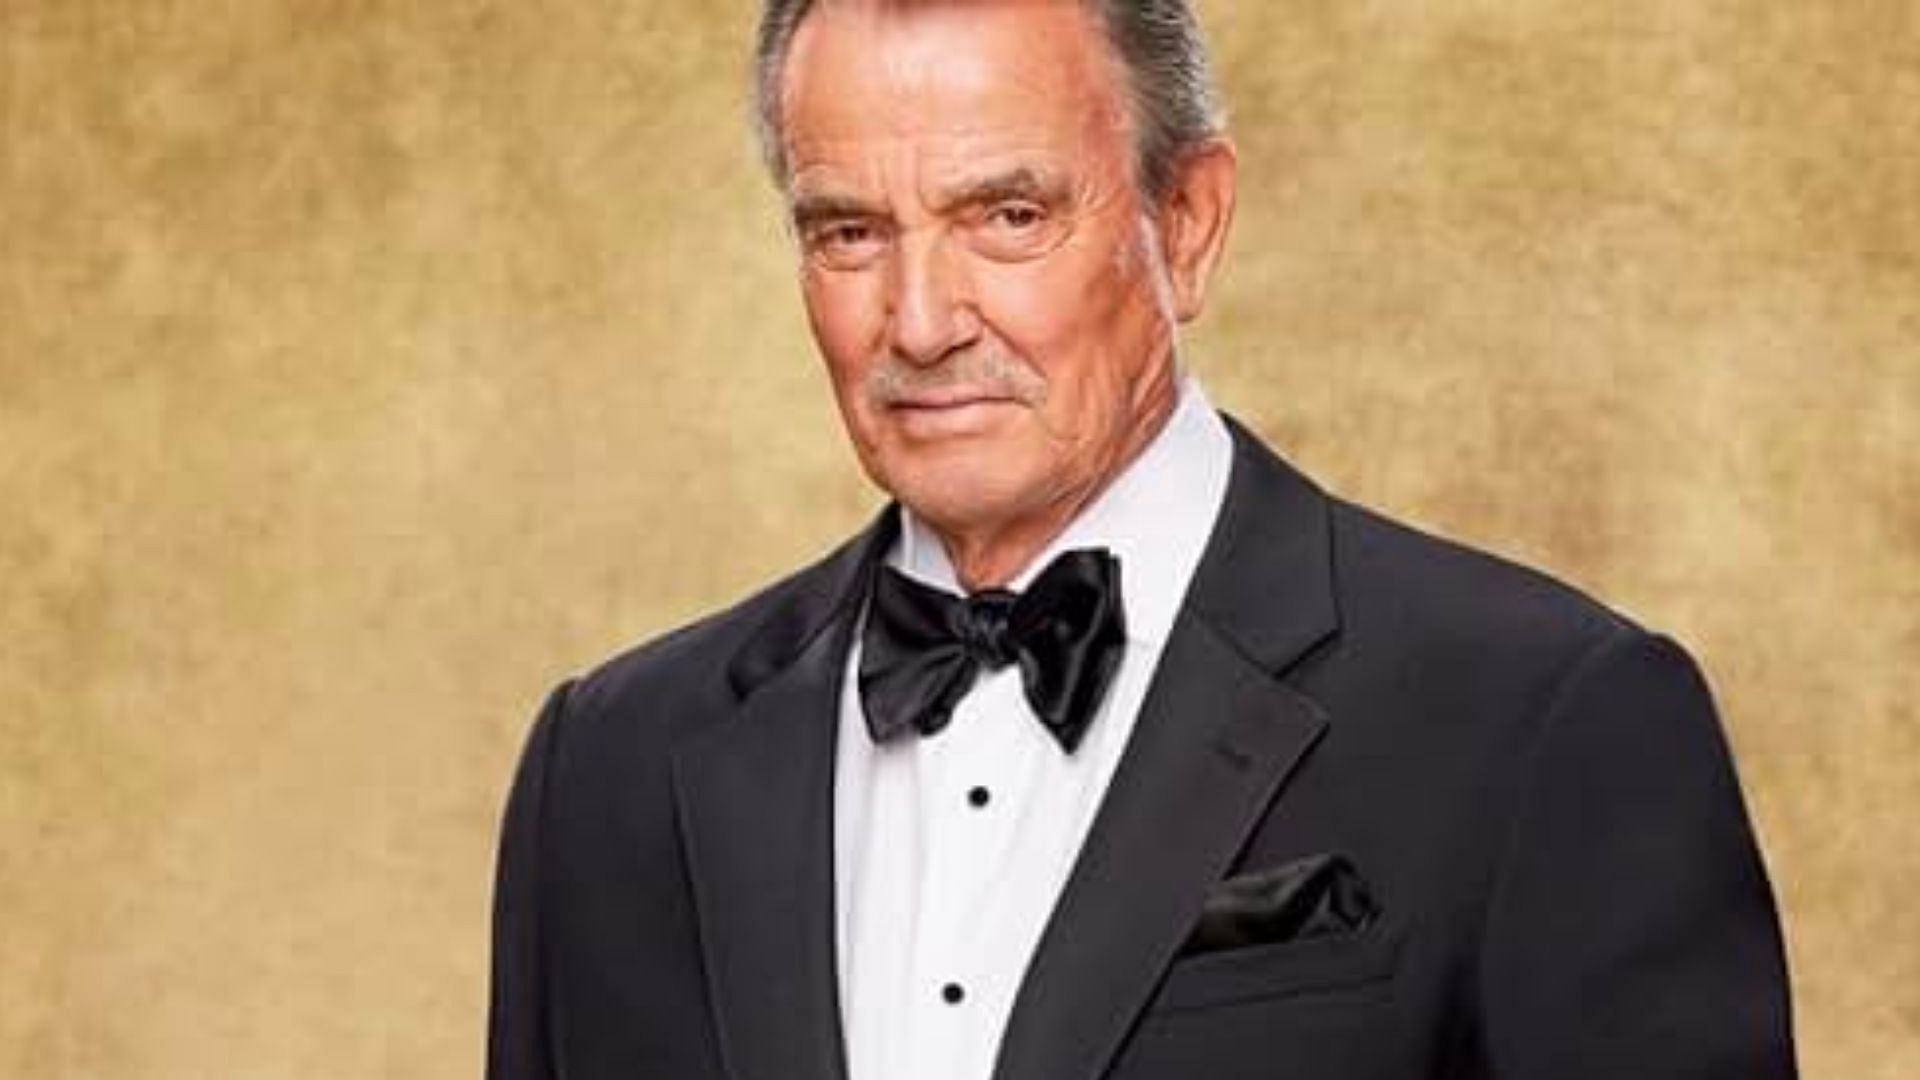 Victor Newman portrayed by Eric Braeden in The Young and the Restless (Image via IMDb)